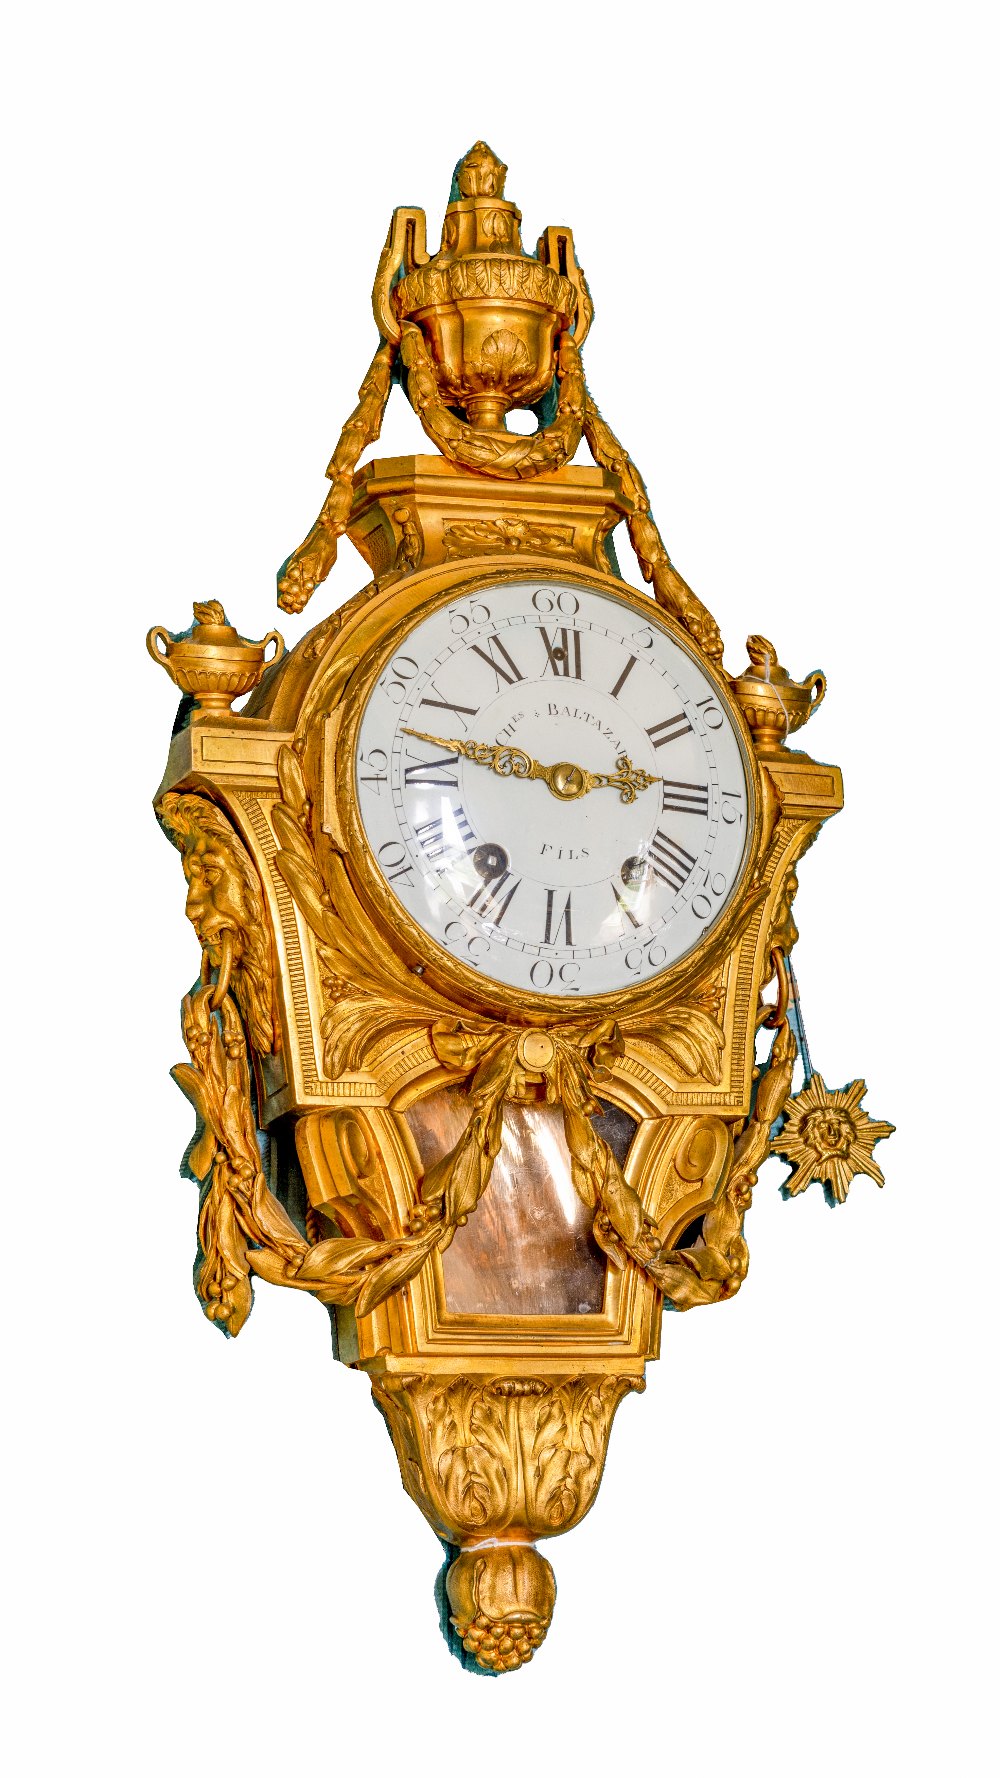 An important fine quality 18th Century French late Louis XV ormolu striking Cartel Clock, by